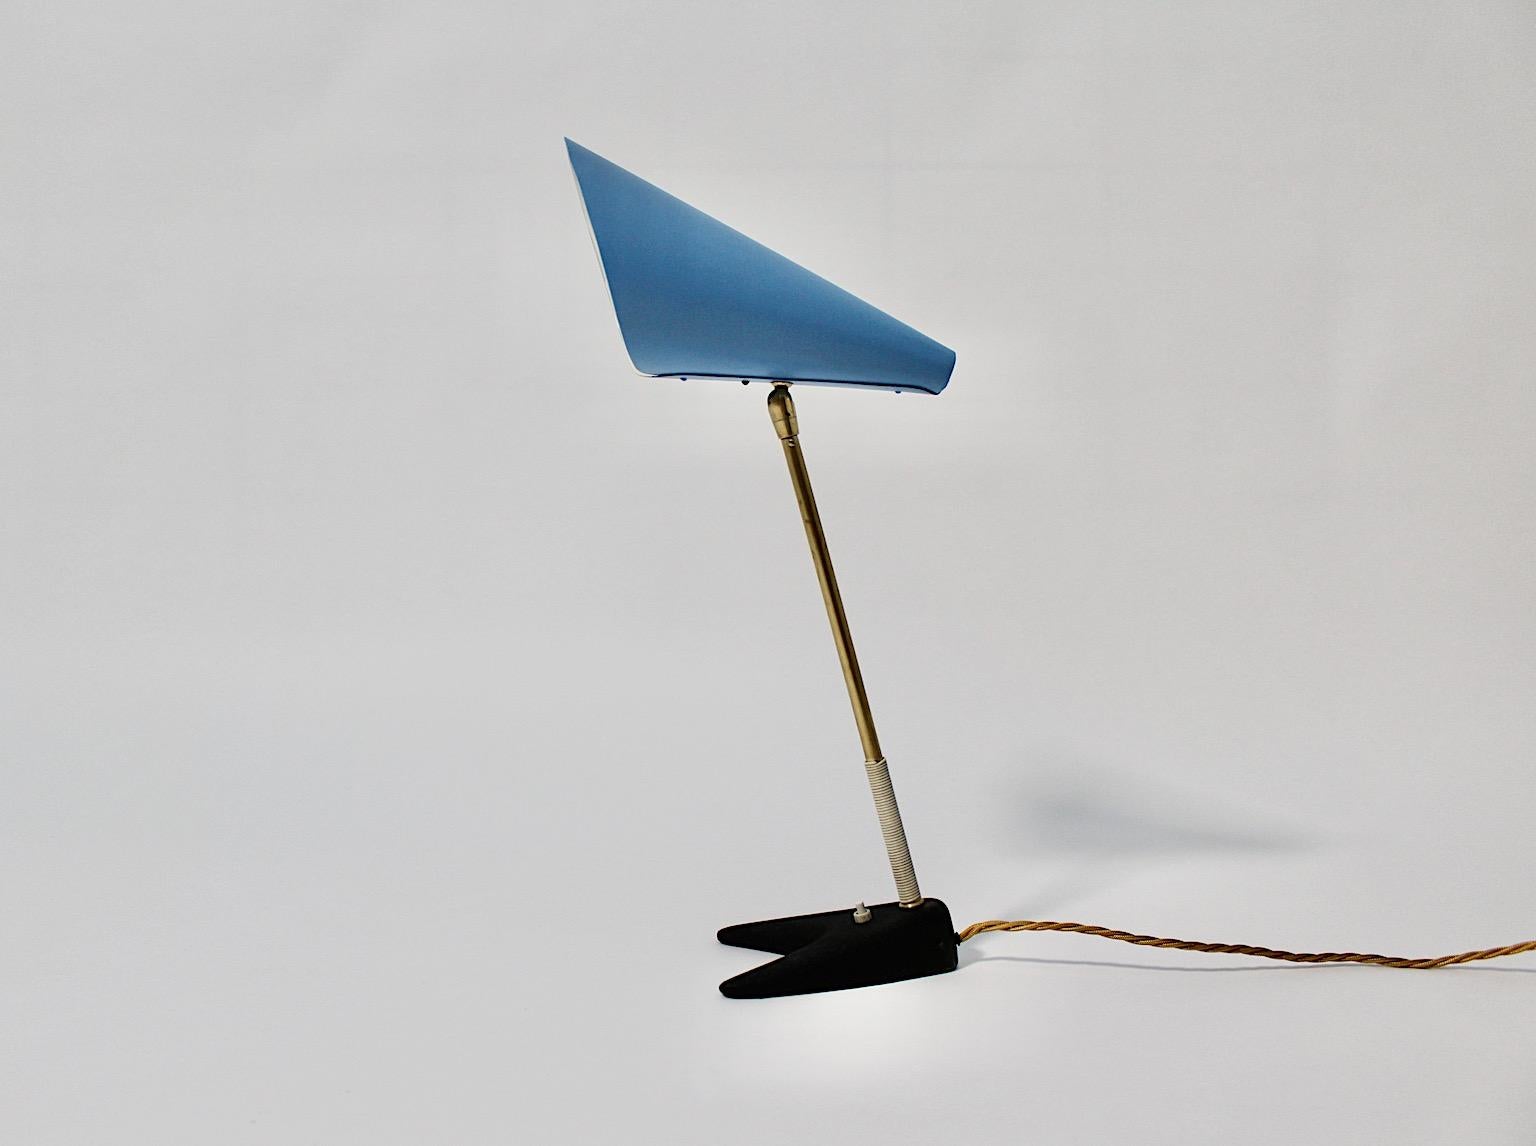 Mid-Century Modern vintage table lamp in black and blue with brass details by Kalmar 1950s Vienna.
A wonderful iconic table lamp or desk lamp by Kalmar features a fabulous blue lacquered cone shaped shade and a brass stem with string handle.
The